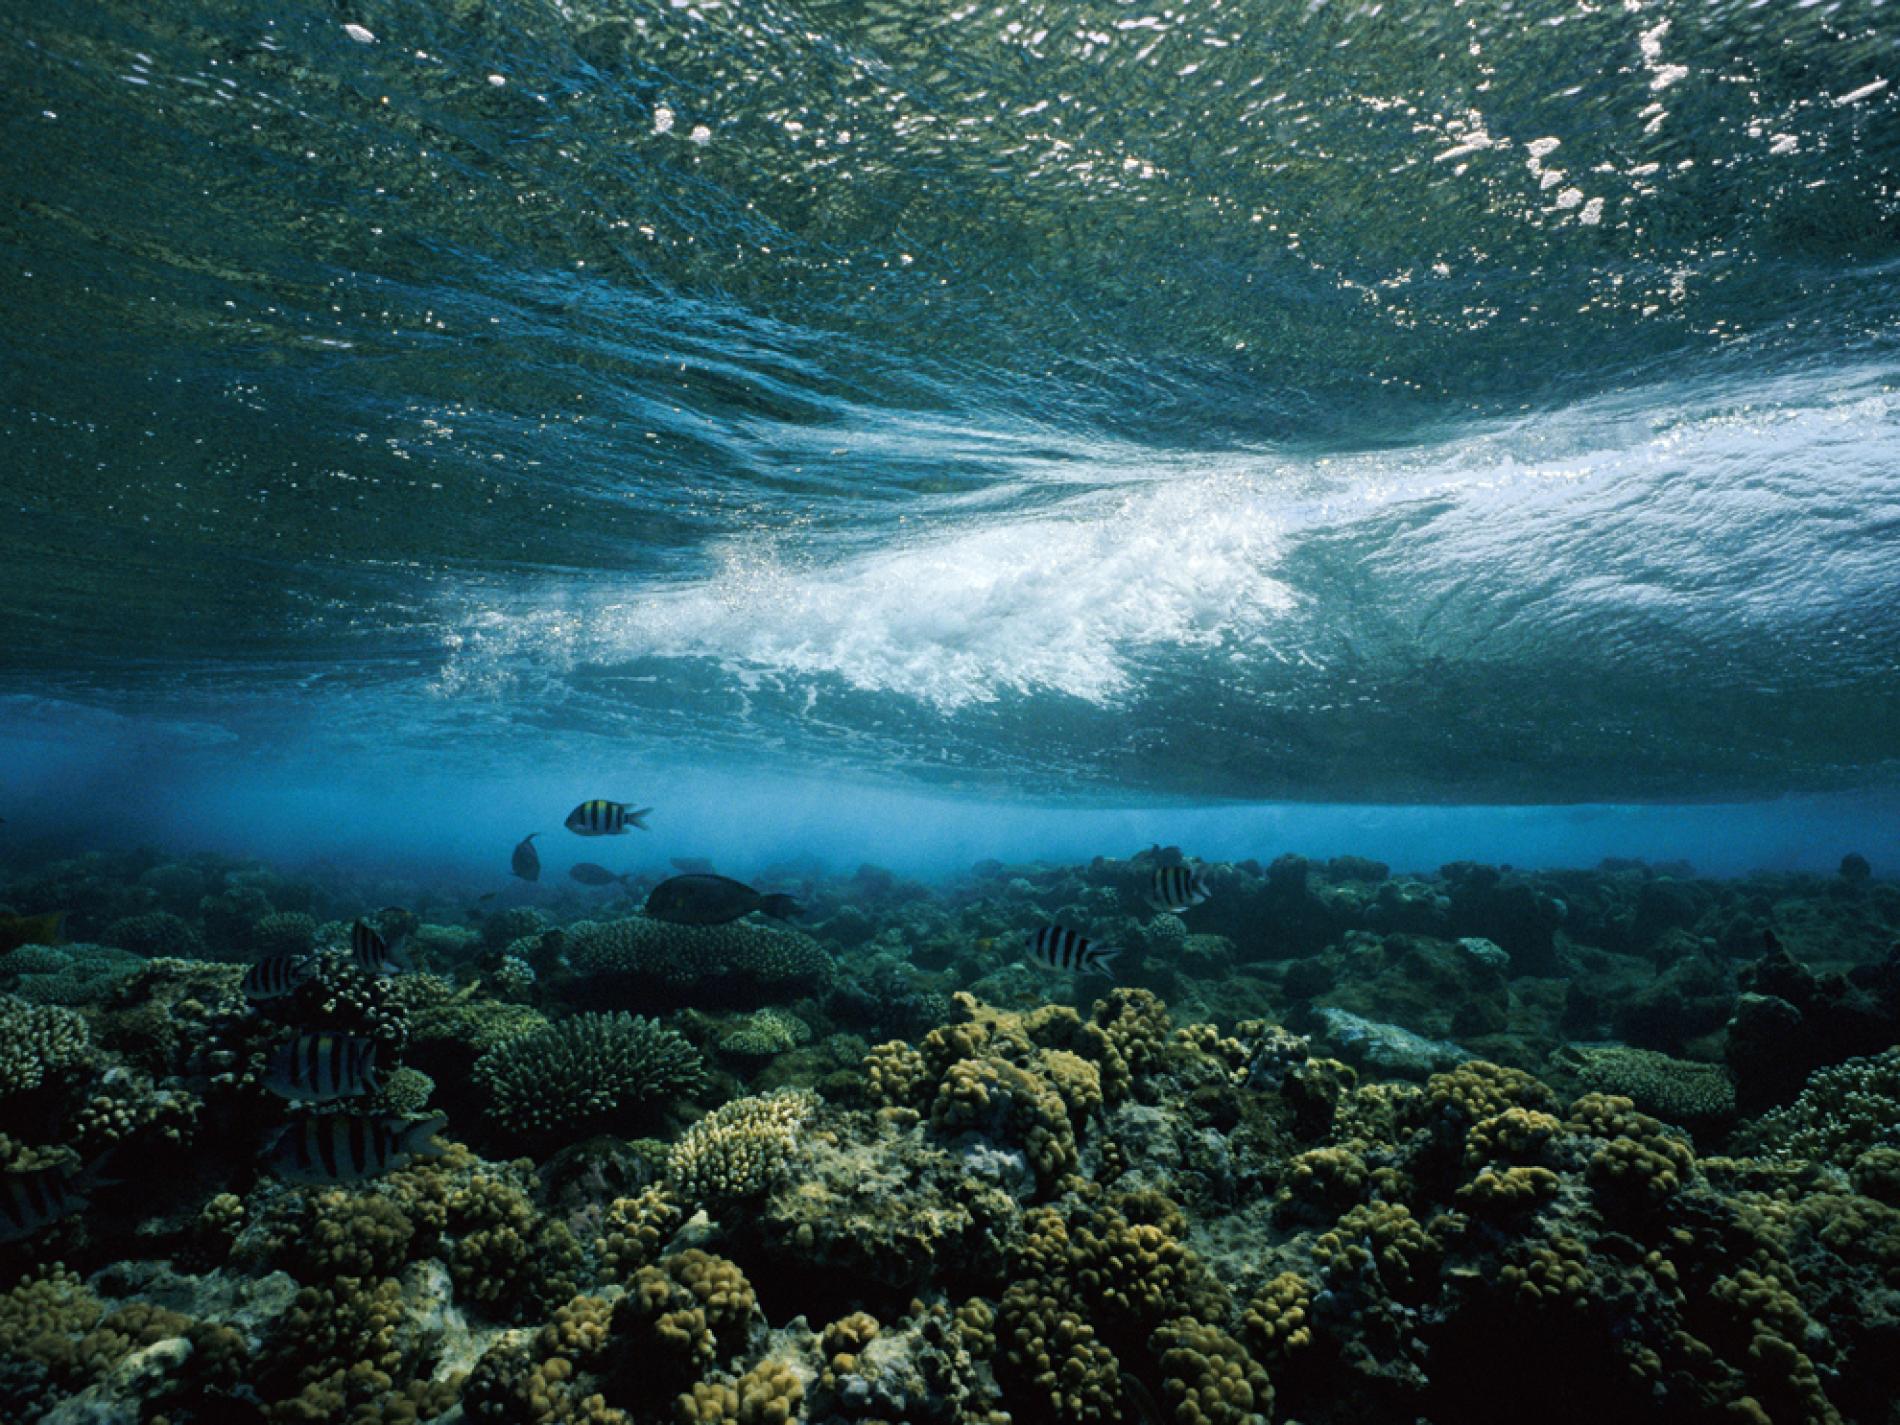 A wave breaks over a coral reef in the Indian Ocean. - Underwater